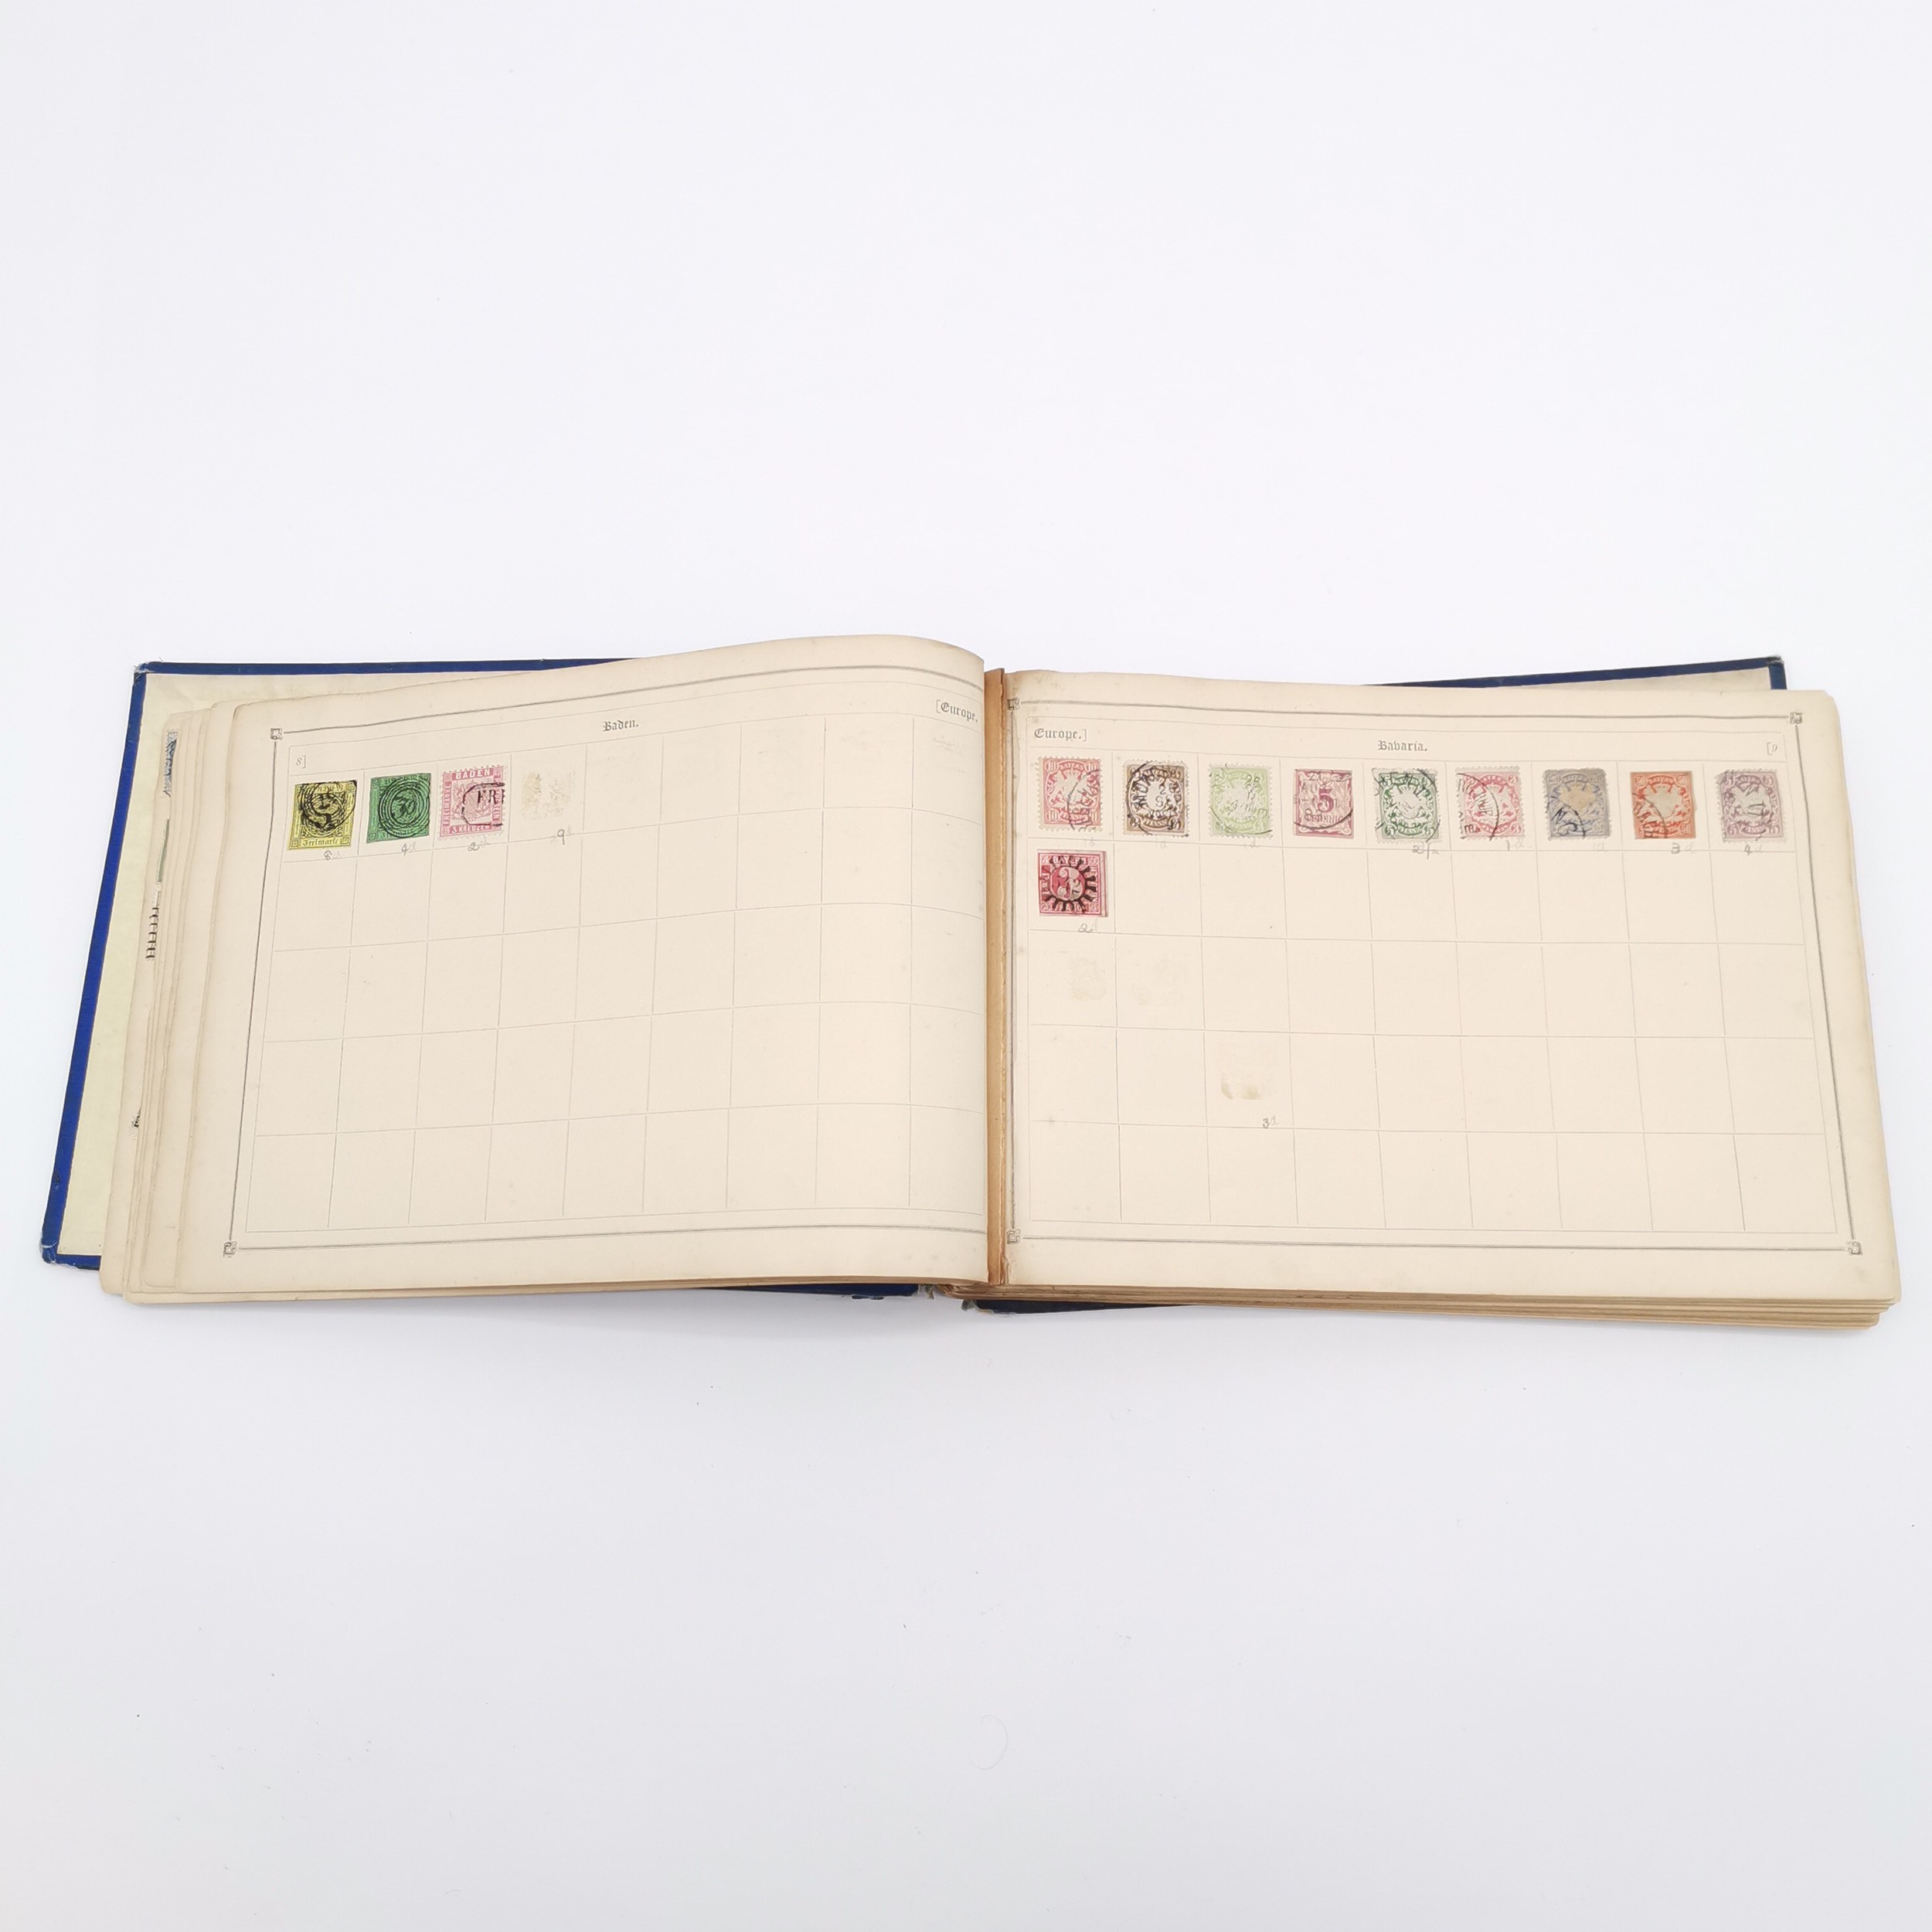 Cosmopolitan postage stamp album with useful collection inc GB 1d penny black, China dragon stamps & - Image 20 of 26